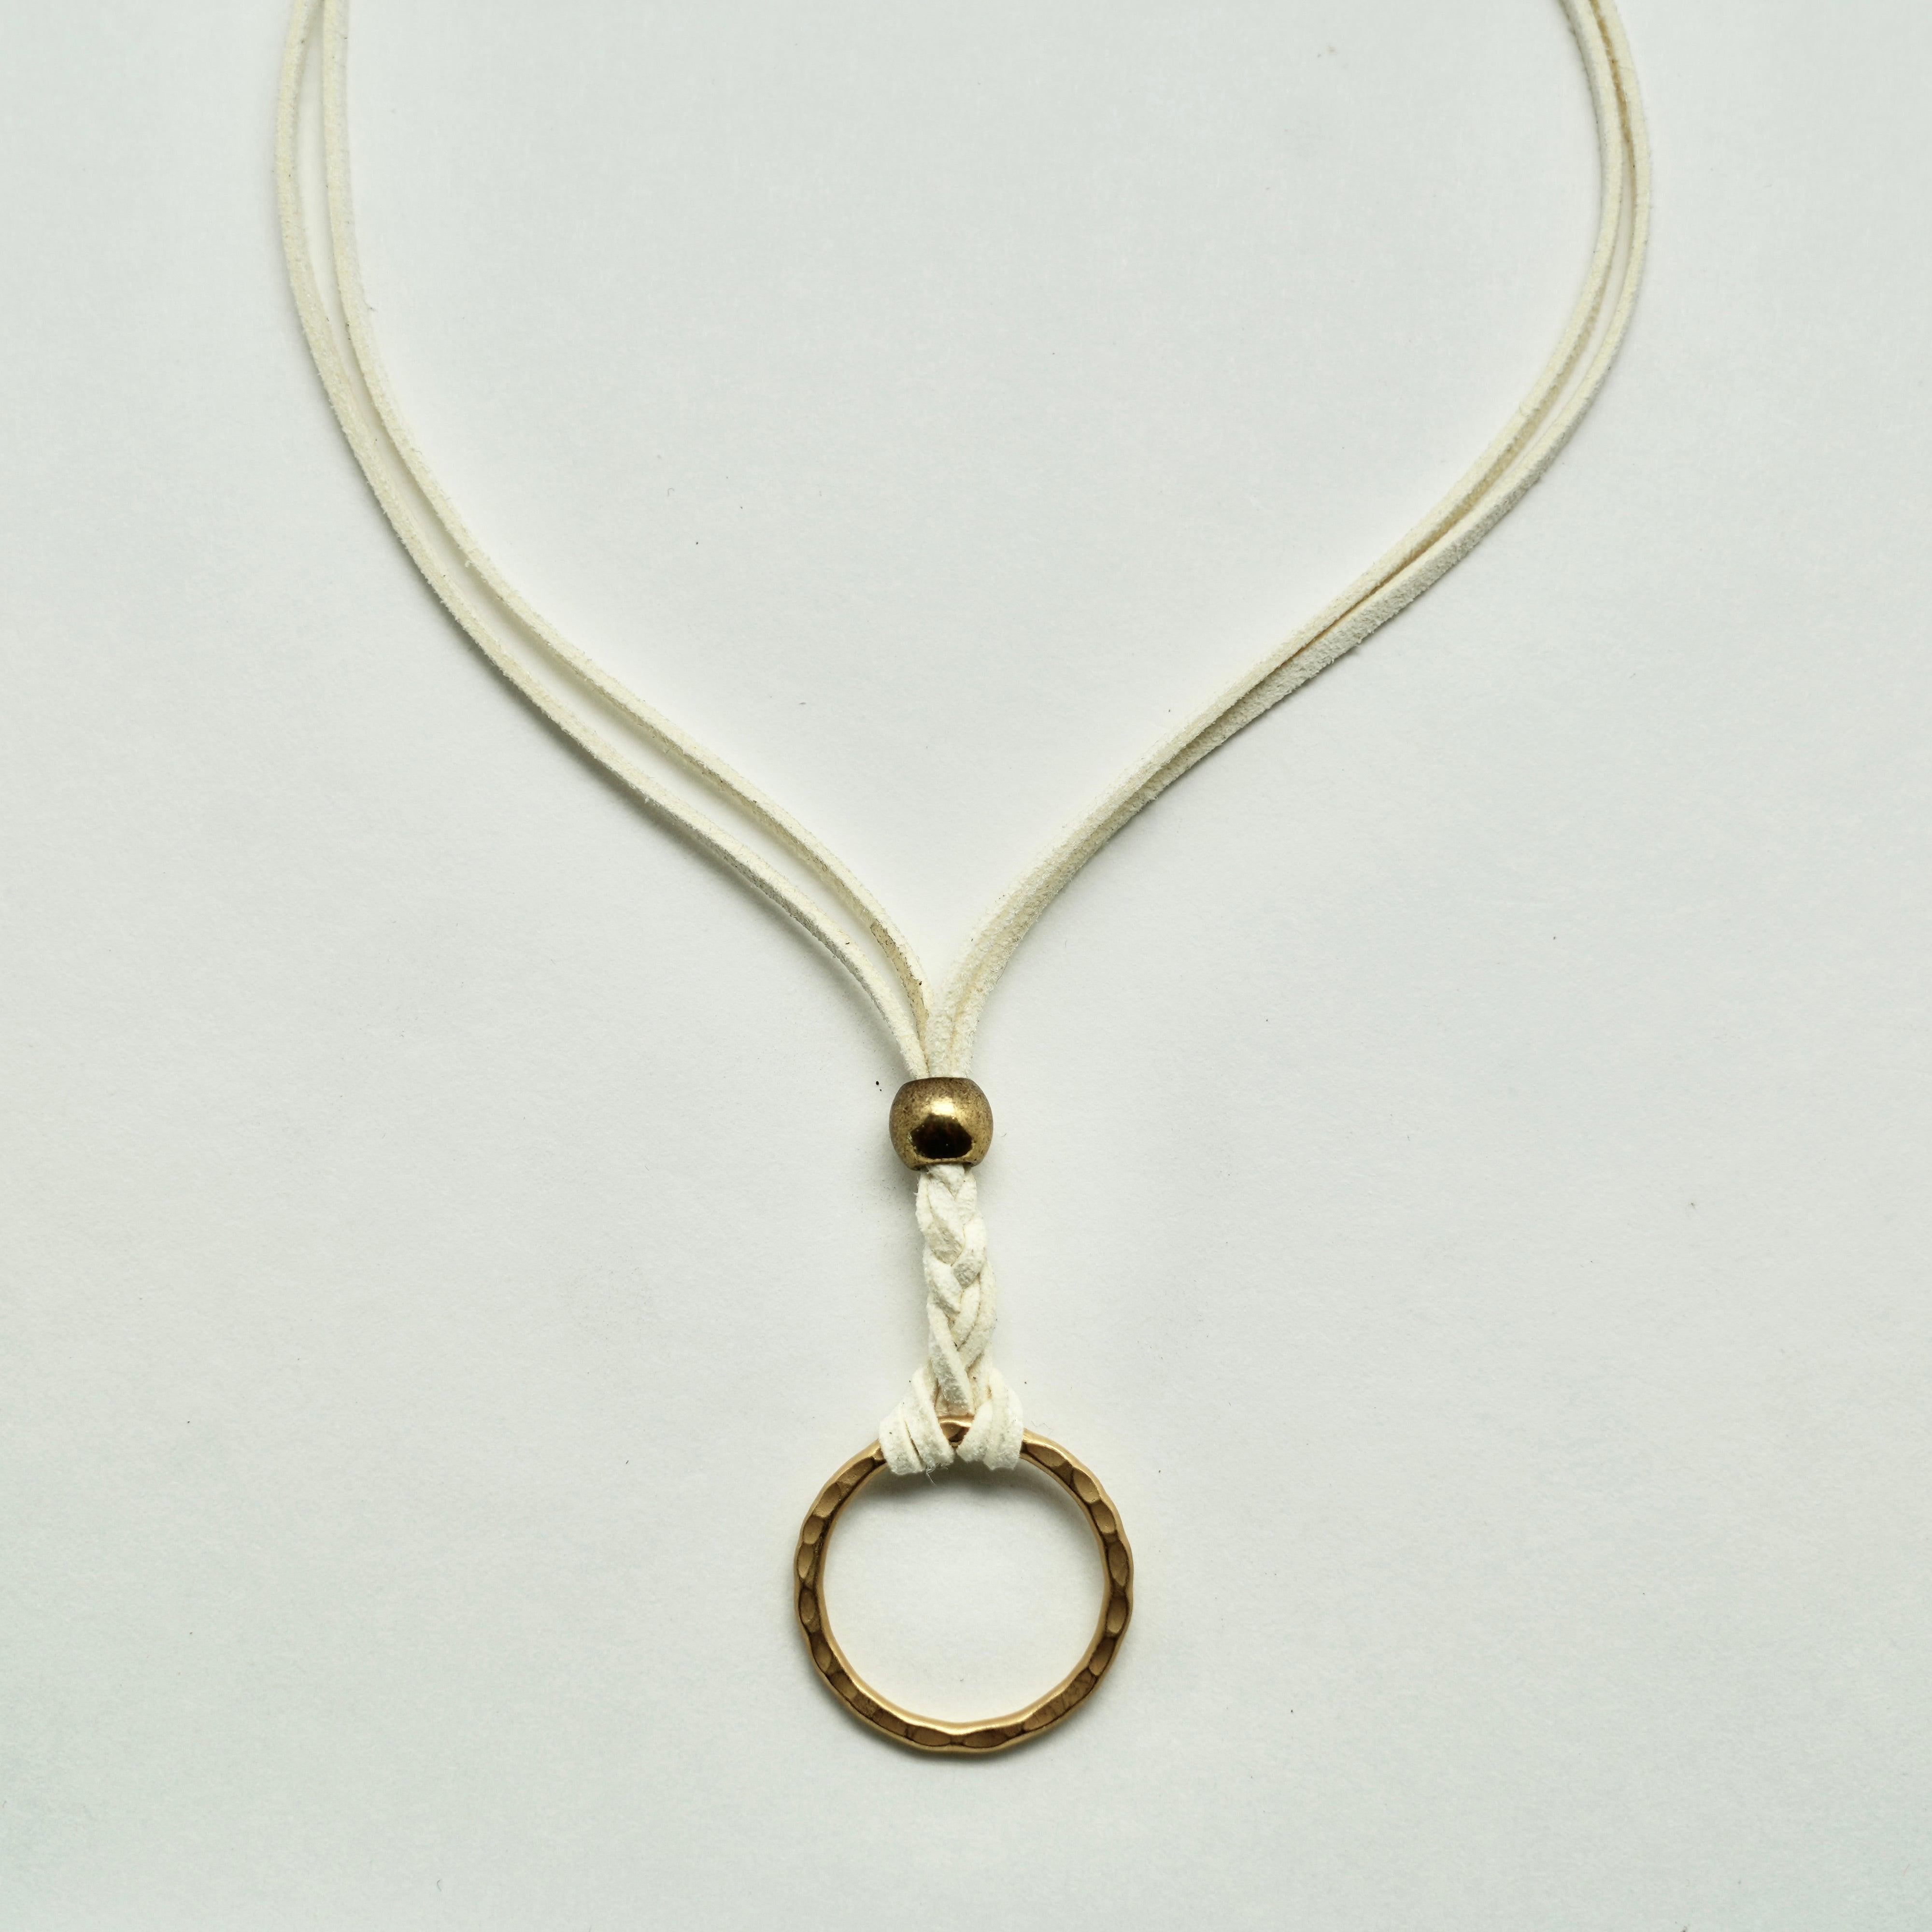 In Circles Suede Necklace In New Condition For Sale In Newport Beach, CA